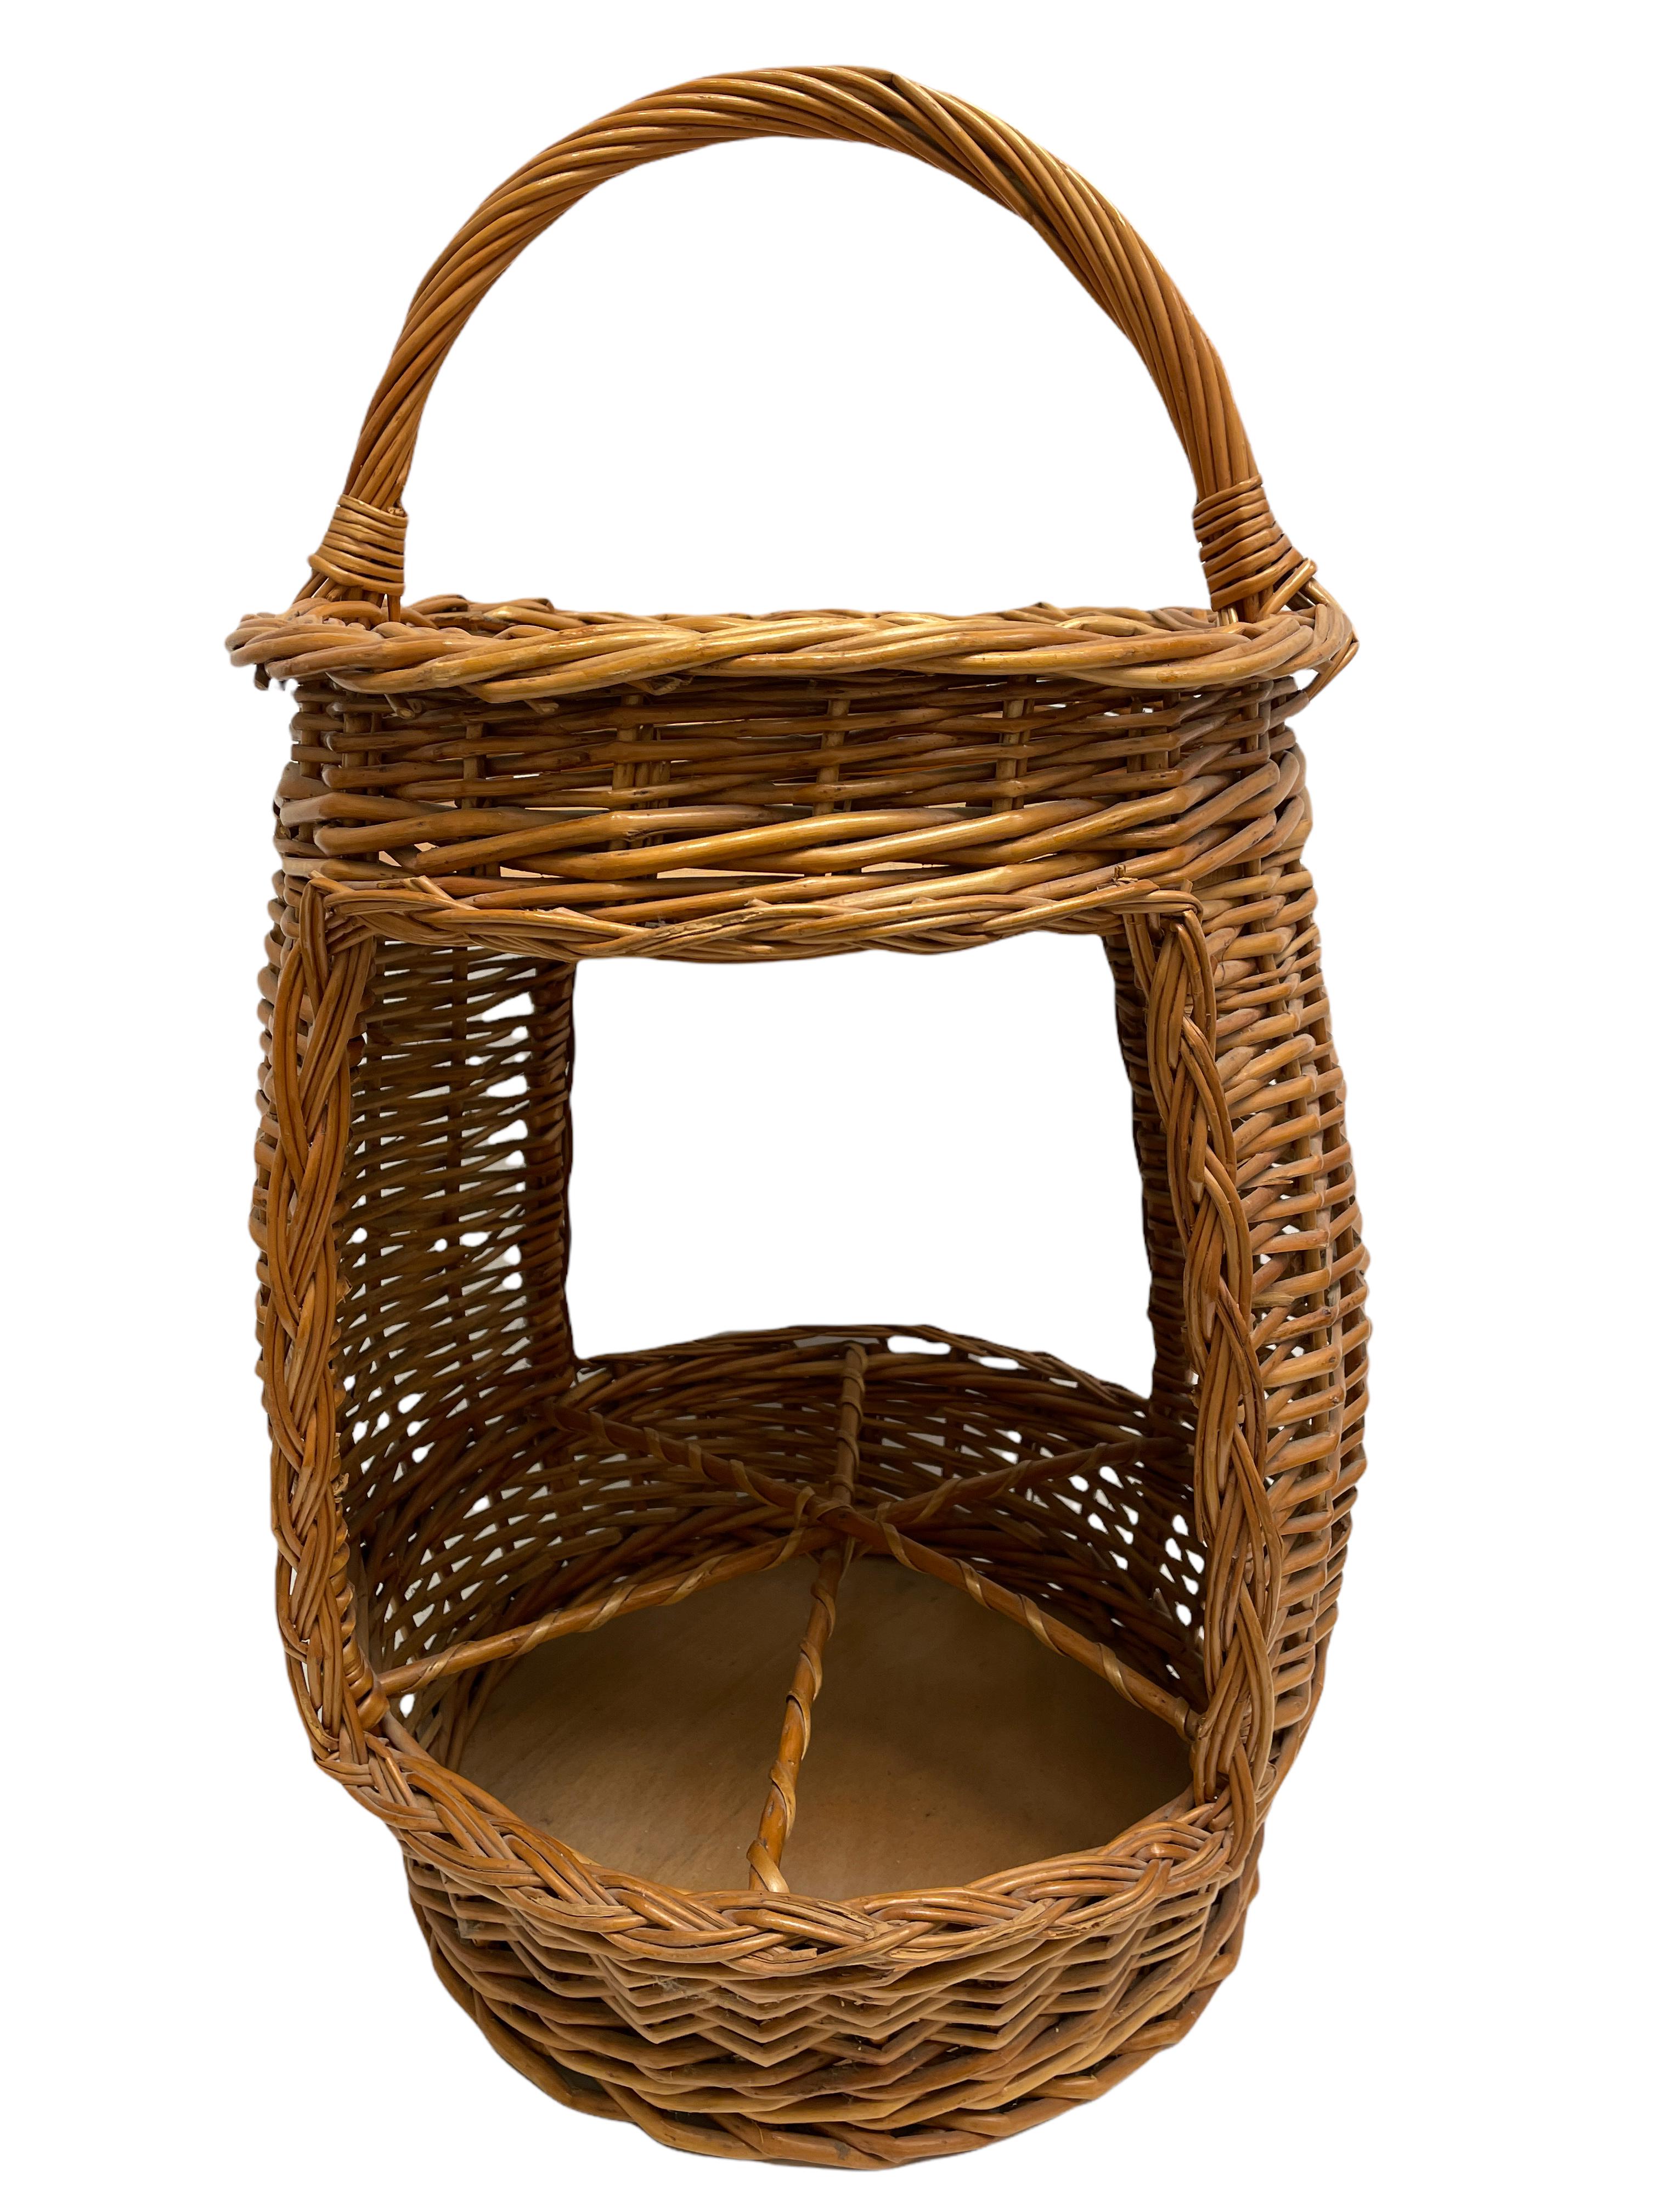 Mid-20th century eye-catching barrel shaped bar basket constructed in hand-braided rattan accented with wood. Nice addition to your home, patio or garden. This is in used condition, with signs of wear as expected with age and use. A nice addition to